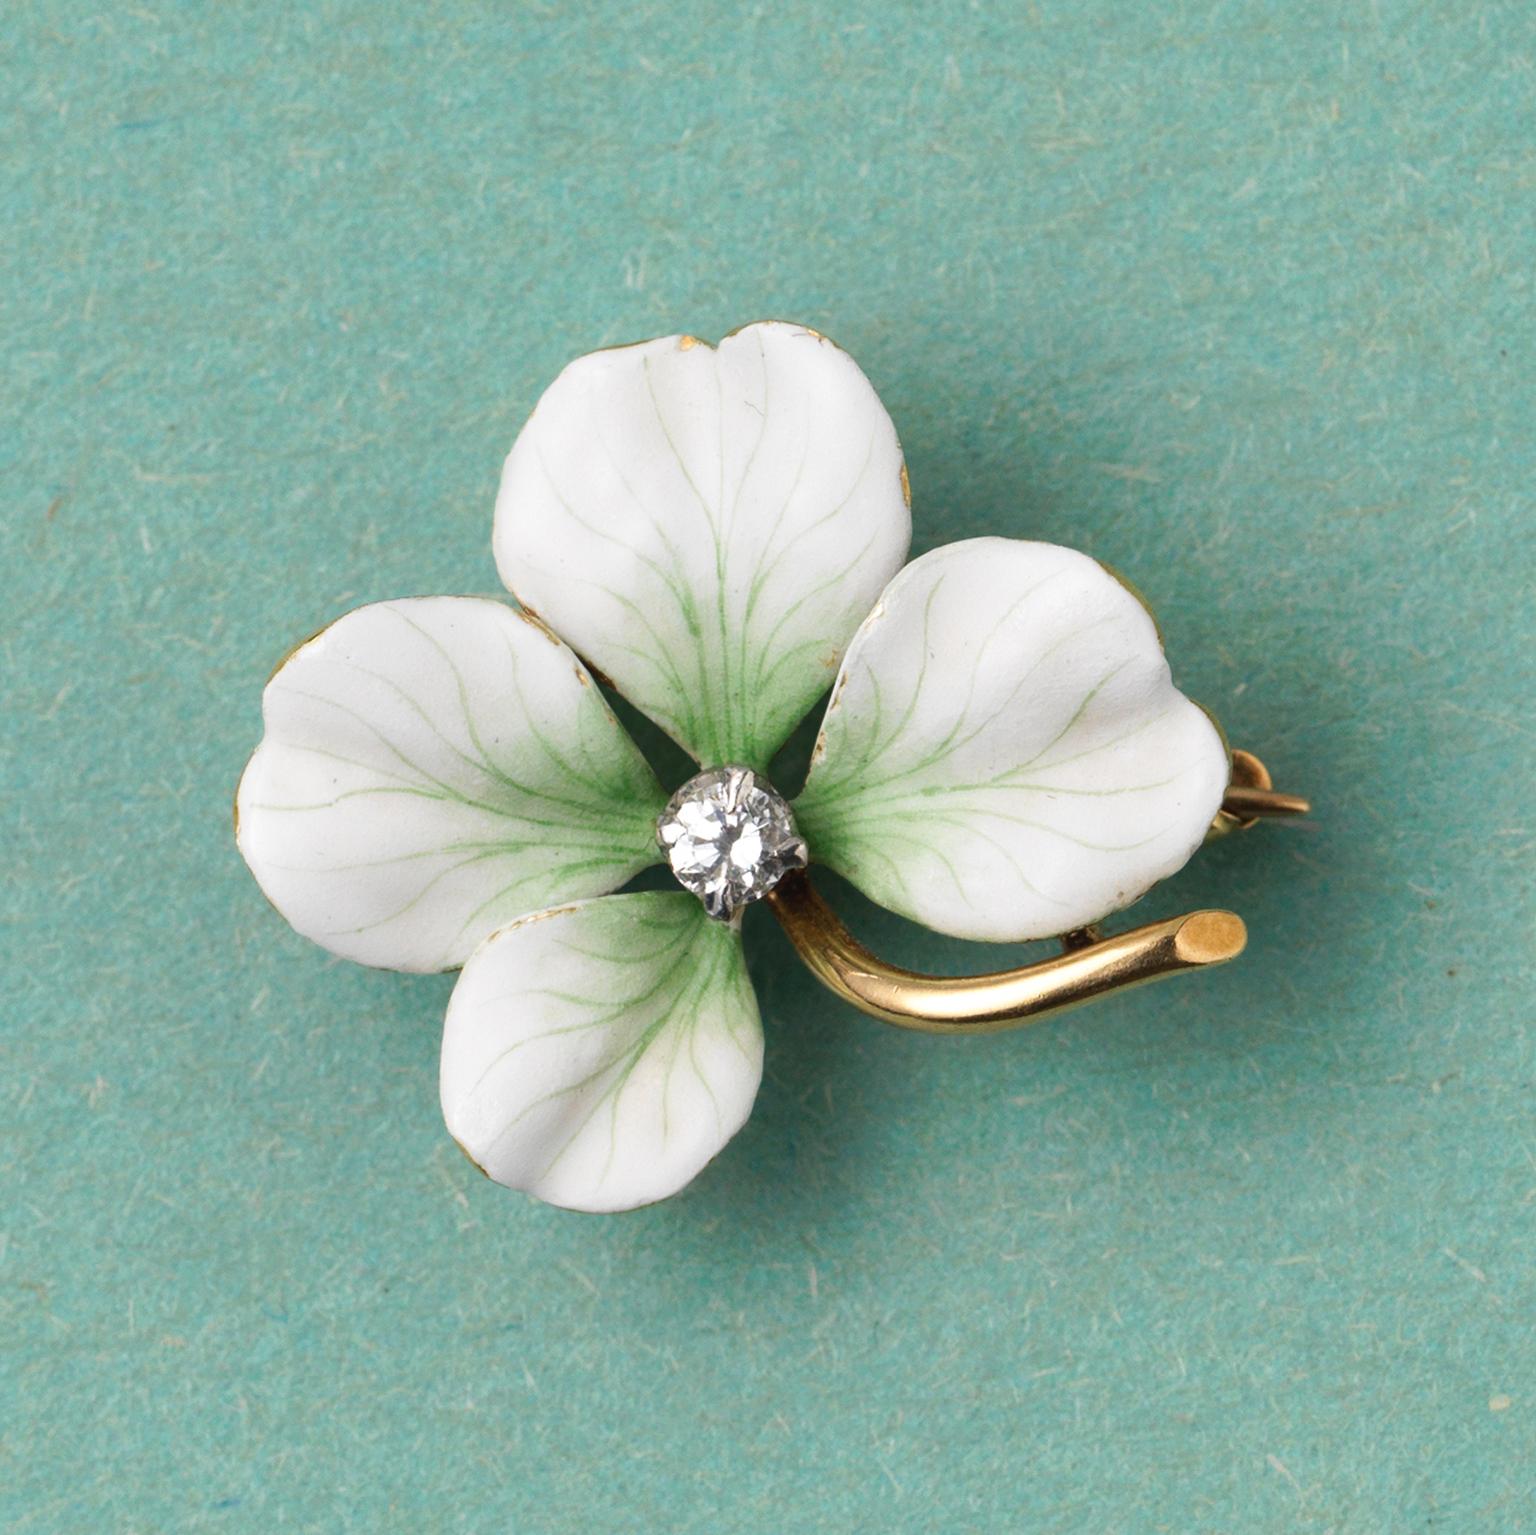 A 14-carat gold brooch in the shape of a white flower or four-leaf clover decorated with white and green enamel and an old-cut diamond in the heart of the flower (app. 0.15 carat), master’s mark HB, possibly for early Oscar Heyman & Brothers. USA,